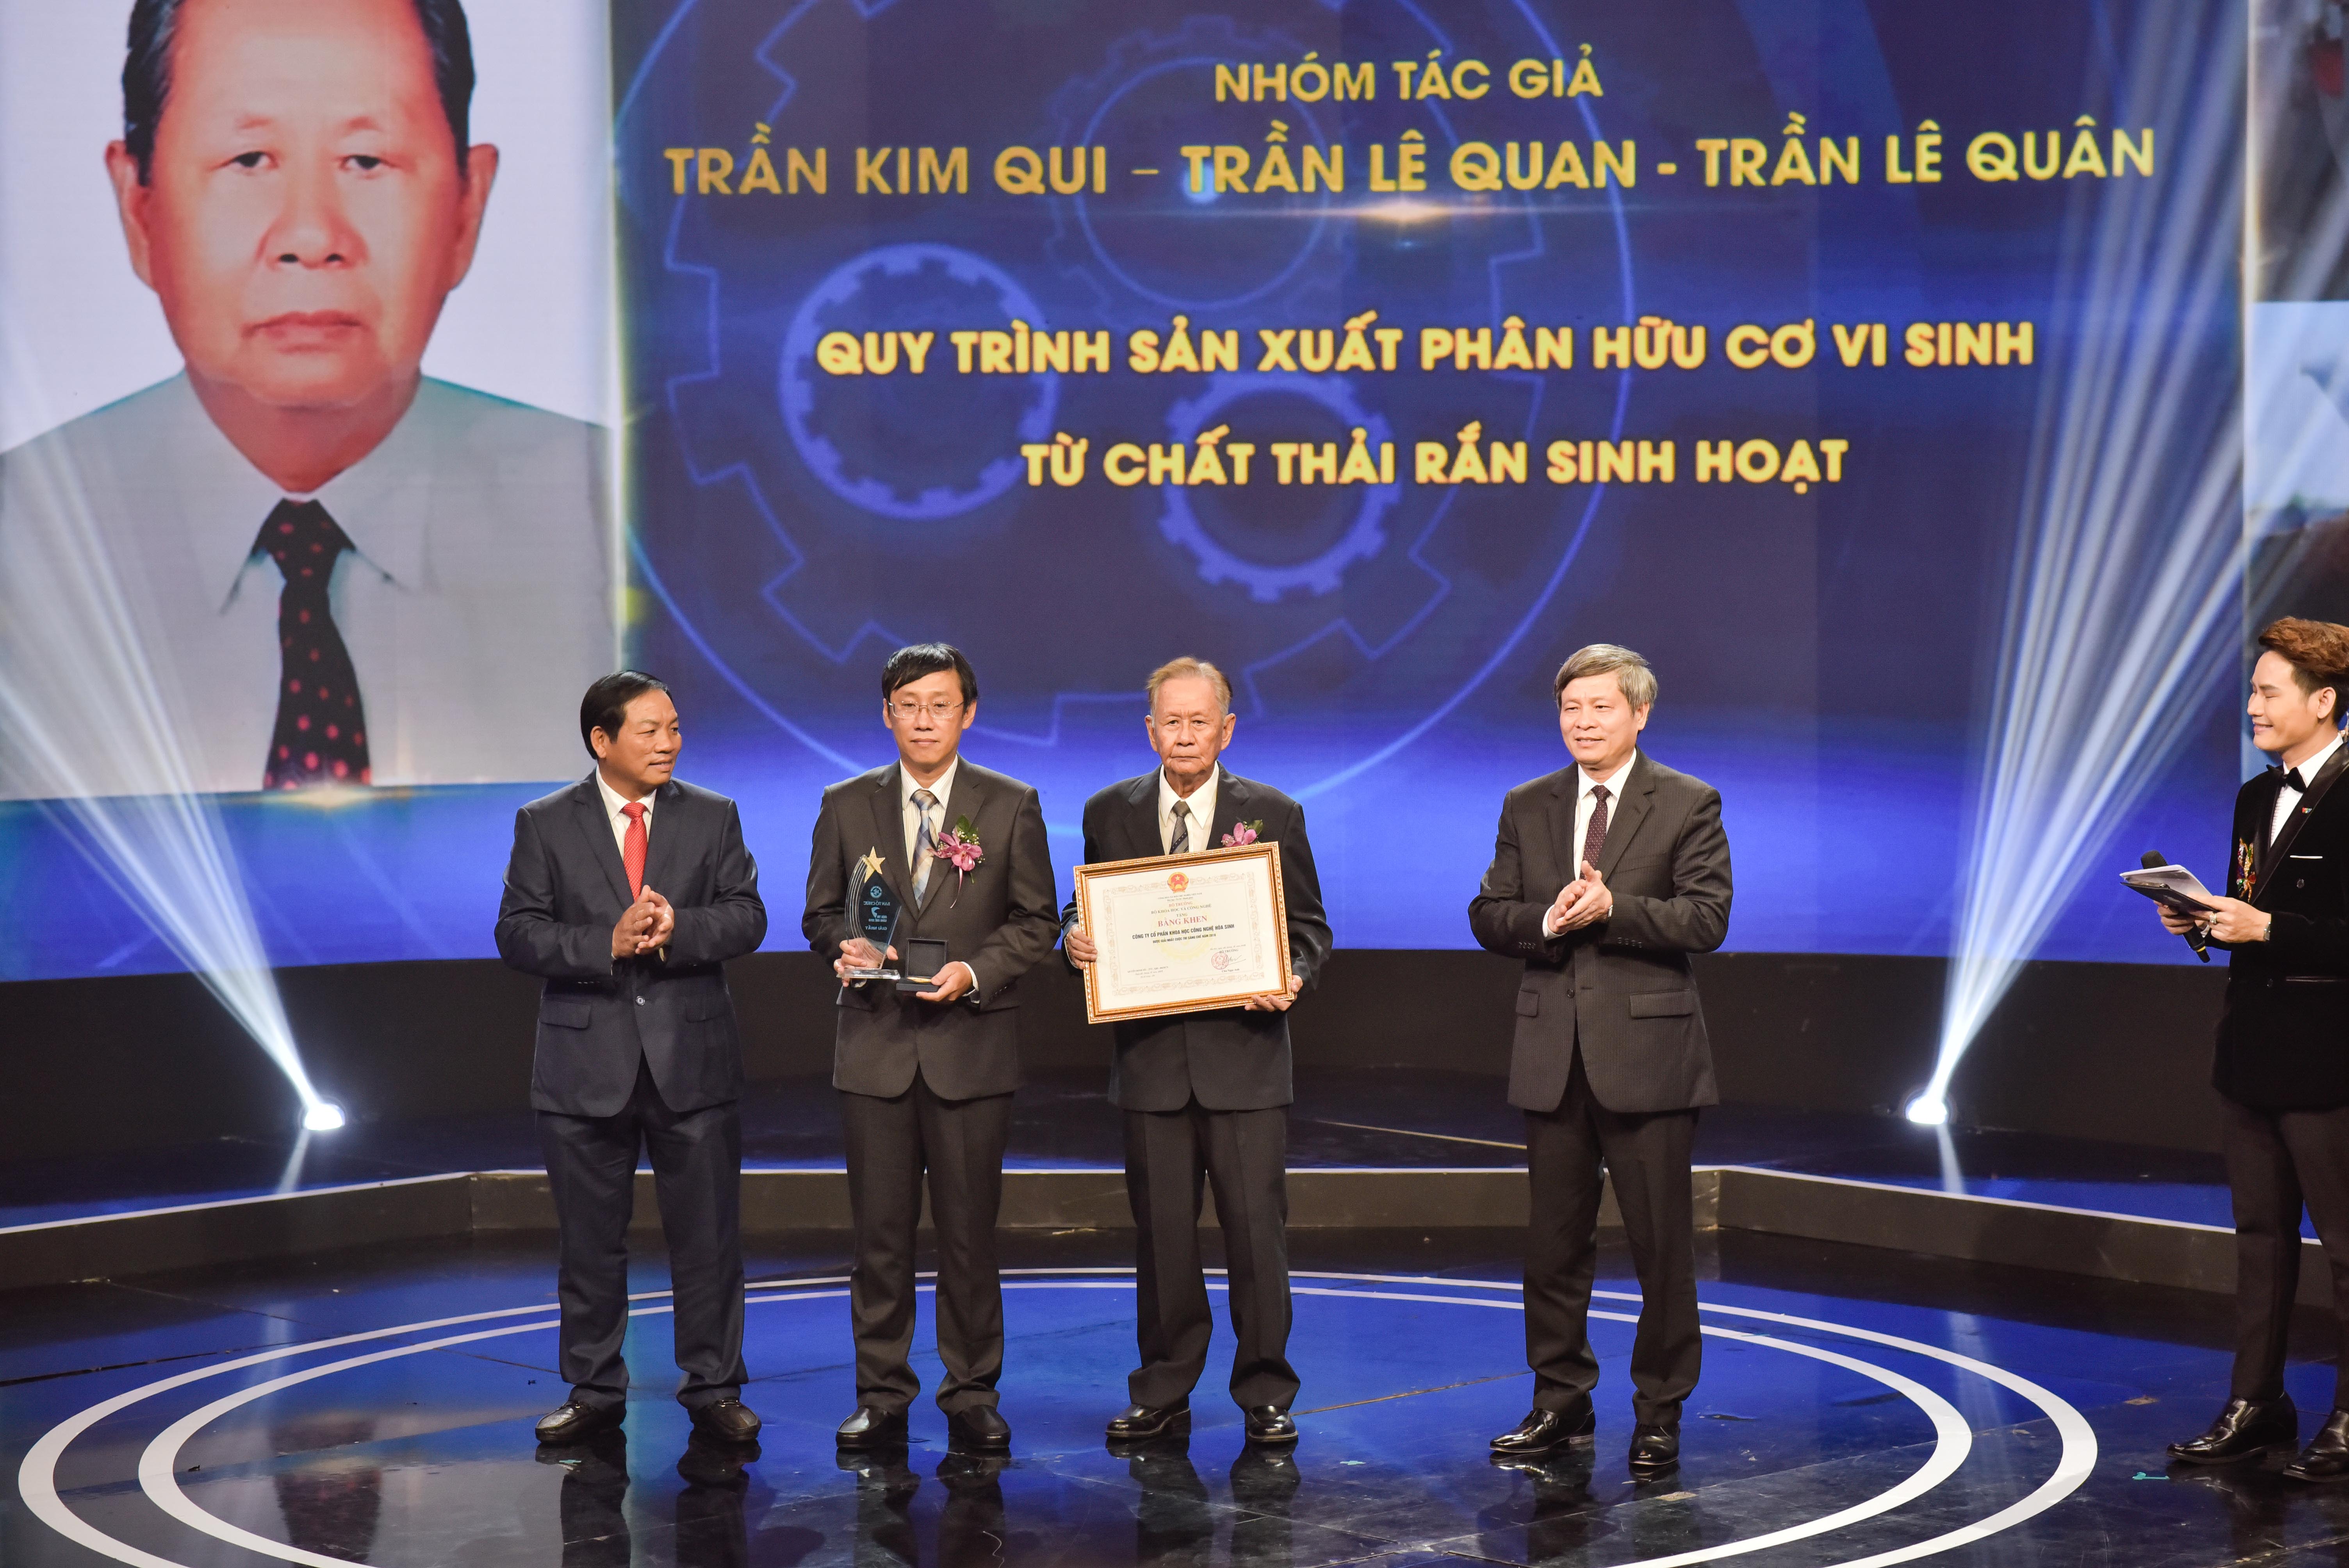 Awarding Ceremony of the 2018 Patent Contest – The environmental solution of the 83-year-old teacher won the first prize